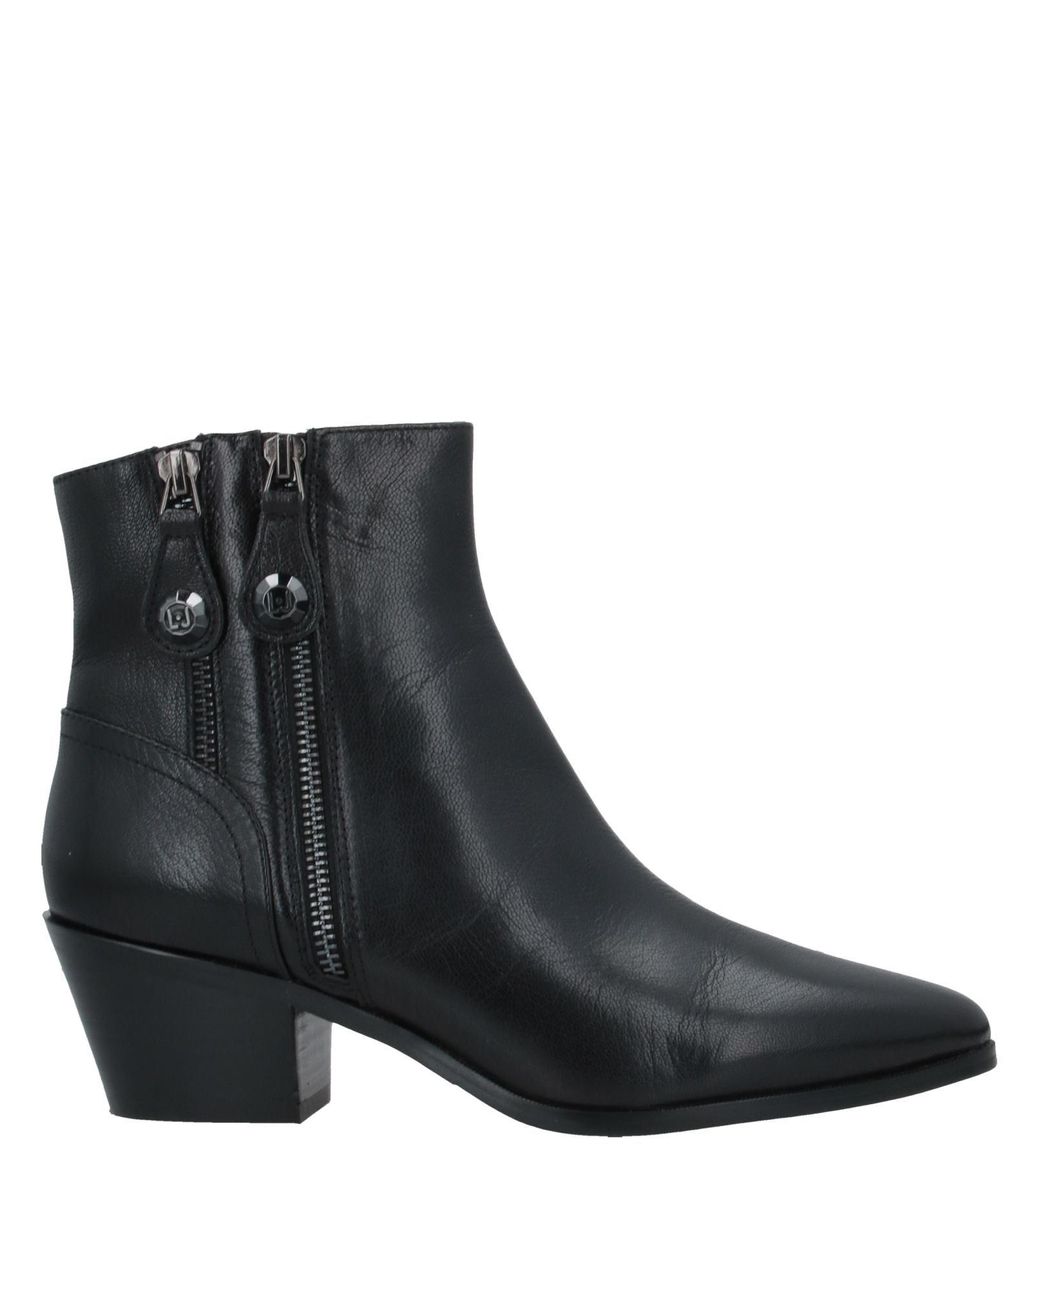 Liu Jo Leather Ankle Boots in Black - Lyst